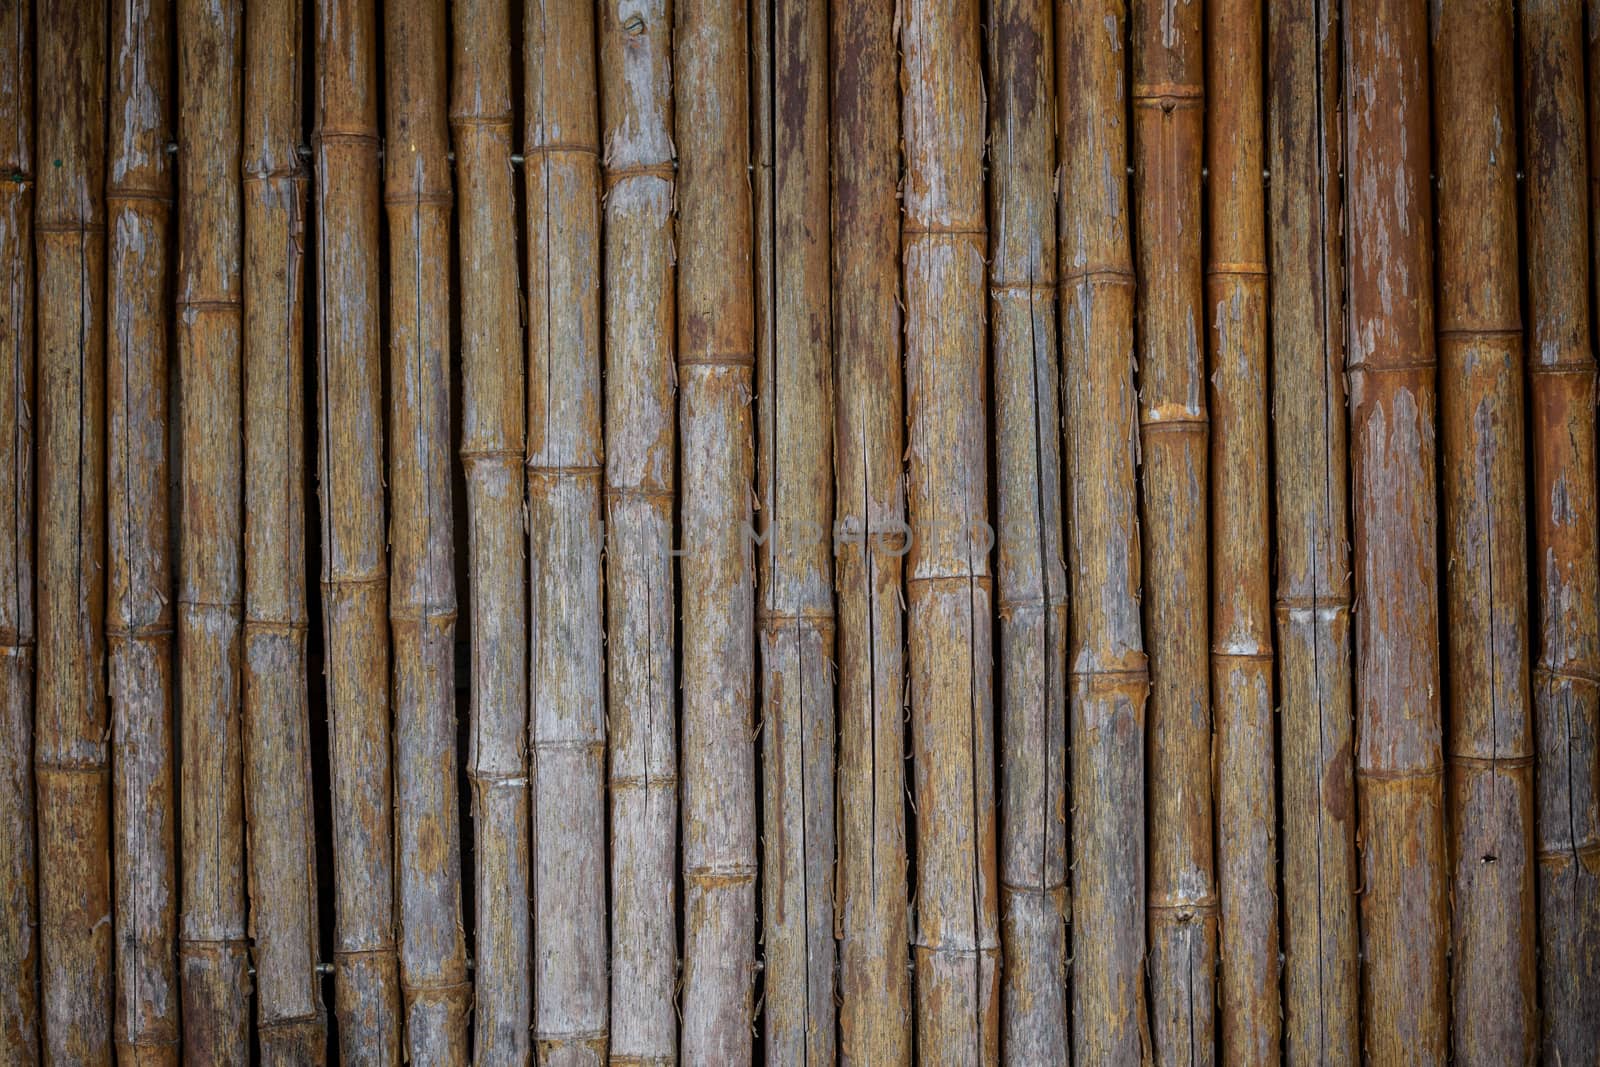 A close-up image of a bamboo wall texture backgroud. Check out other textures in my portfolio.